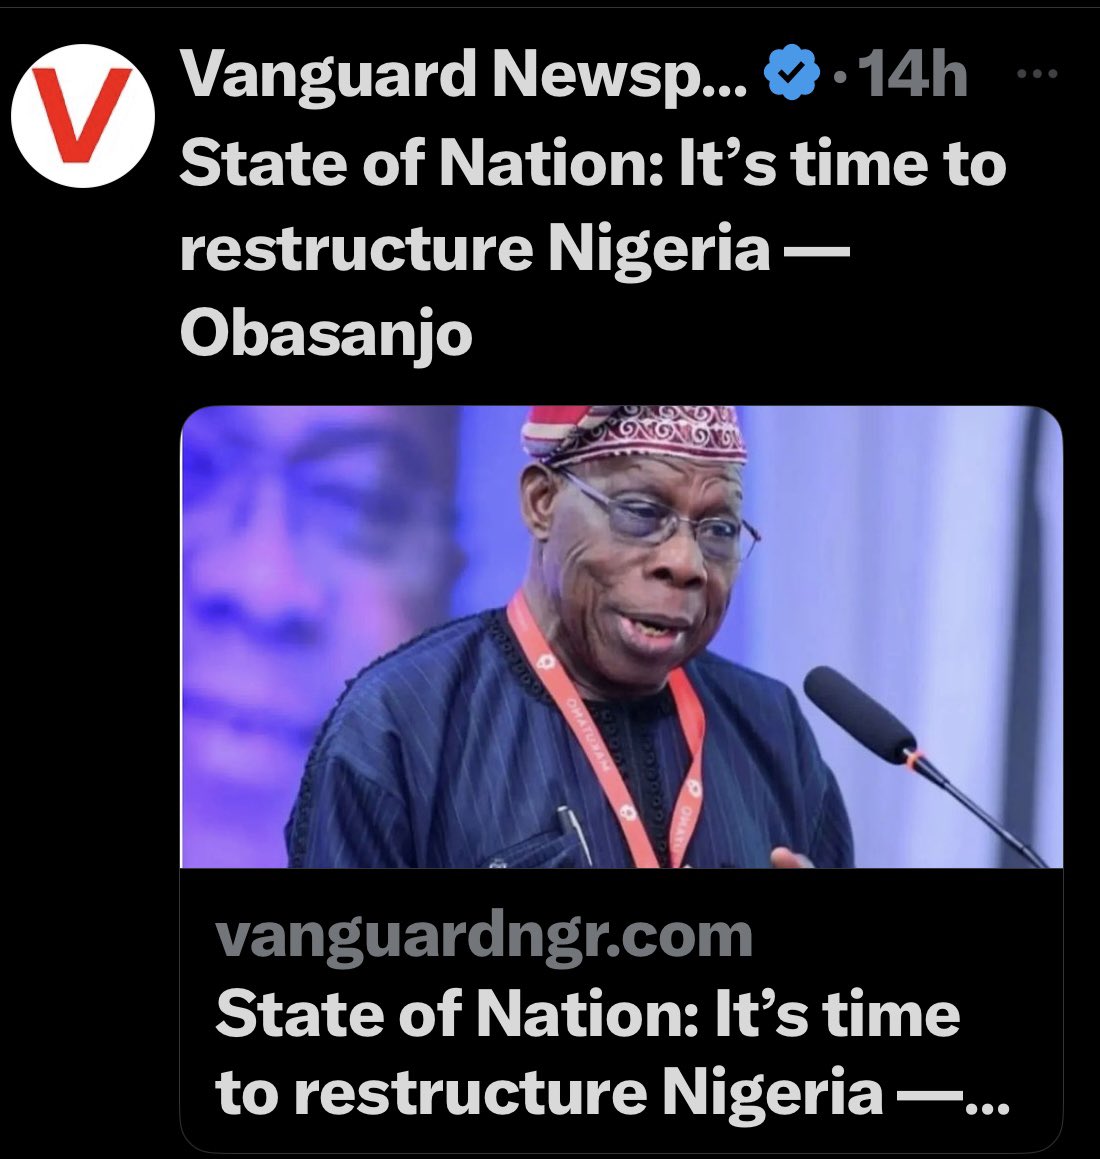 @Emjyke No room again for Restructuring of Nigeria. Let's Divide this unworkable union called British Nigeria slavery now before it's too late. After all, One Nigeria is a set back to Igbo Race. #FreeMaziNnamdiKanuNow #BiafraReferendumNow #BiafraExitFromNigeriaNow